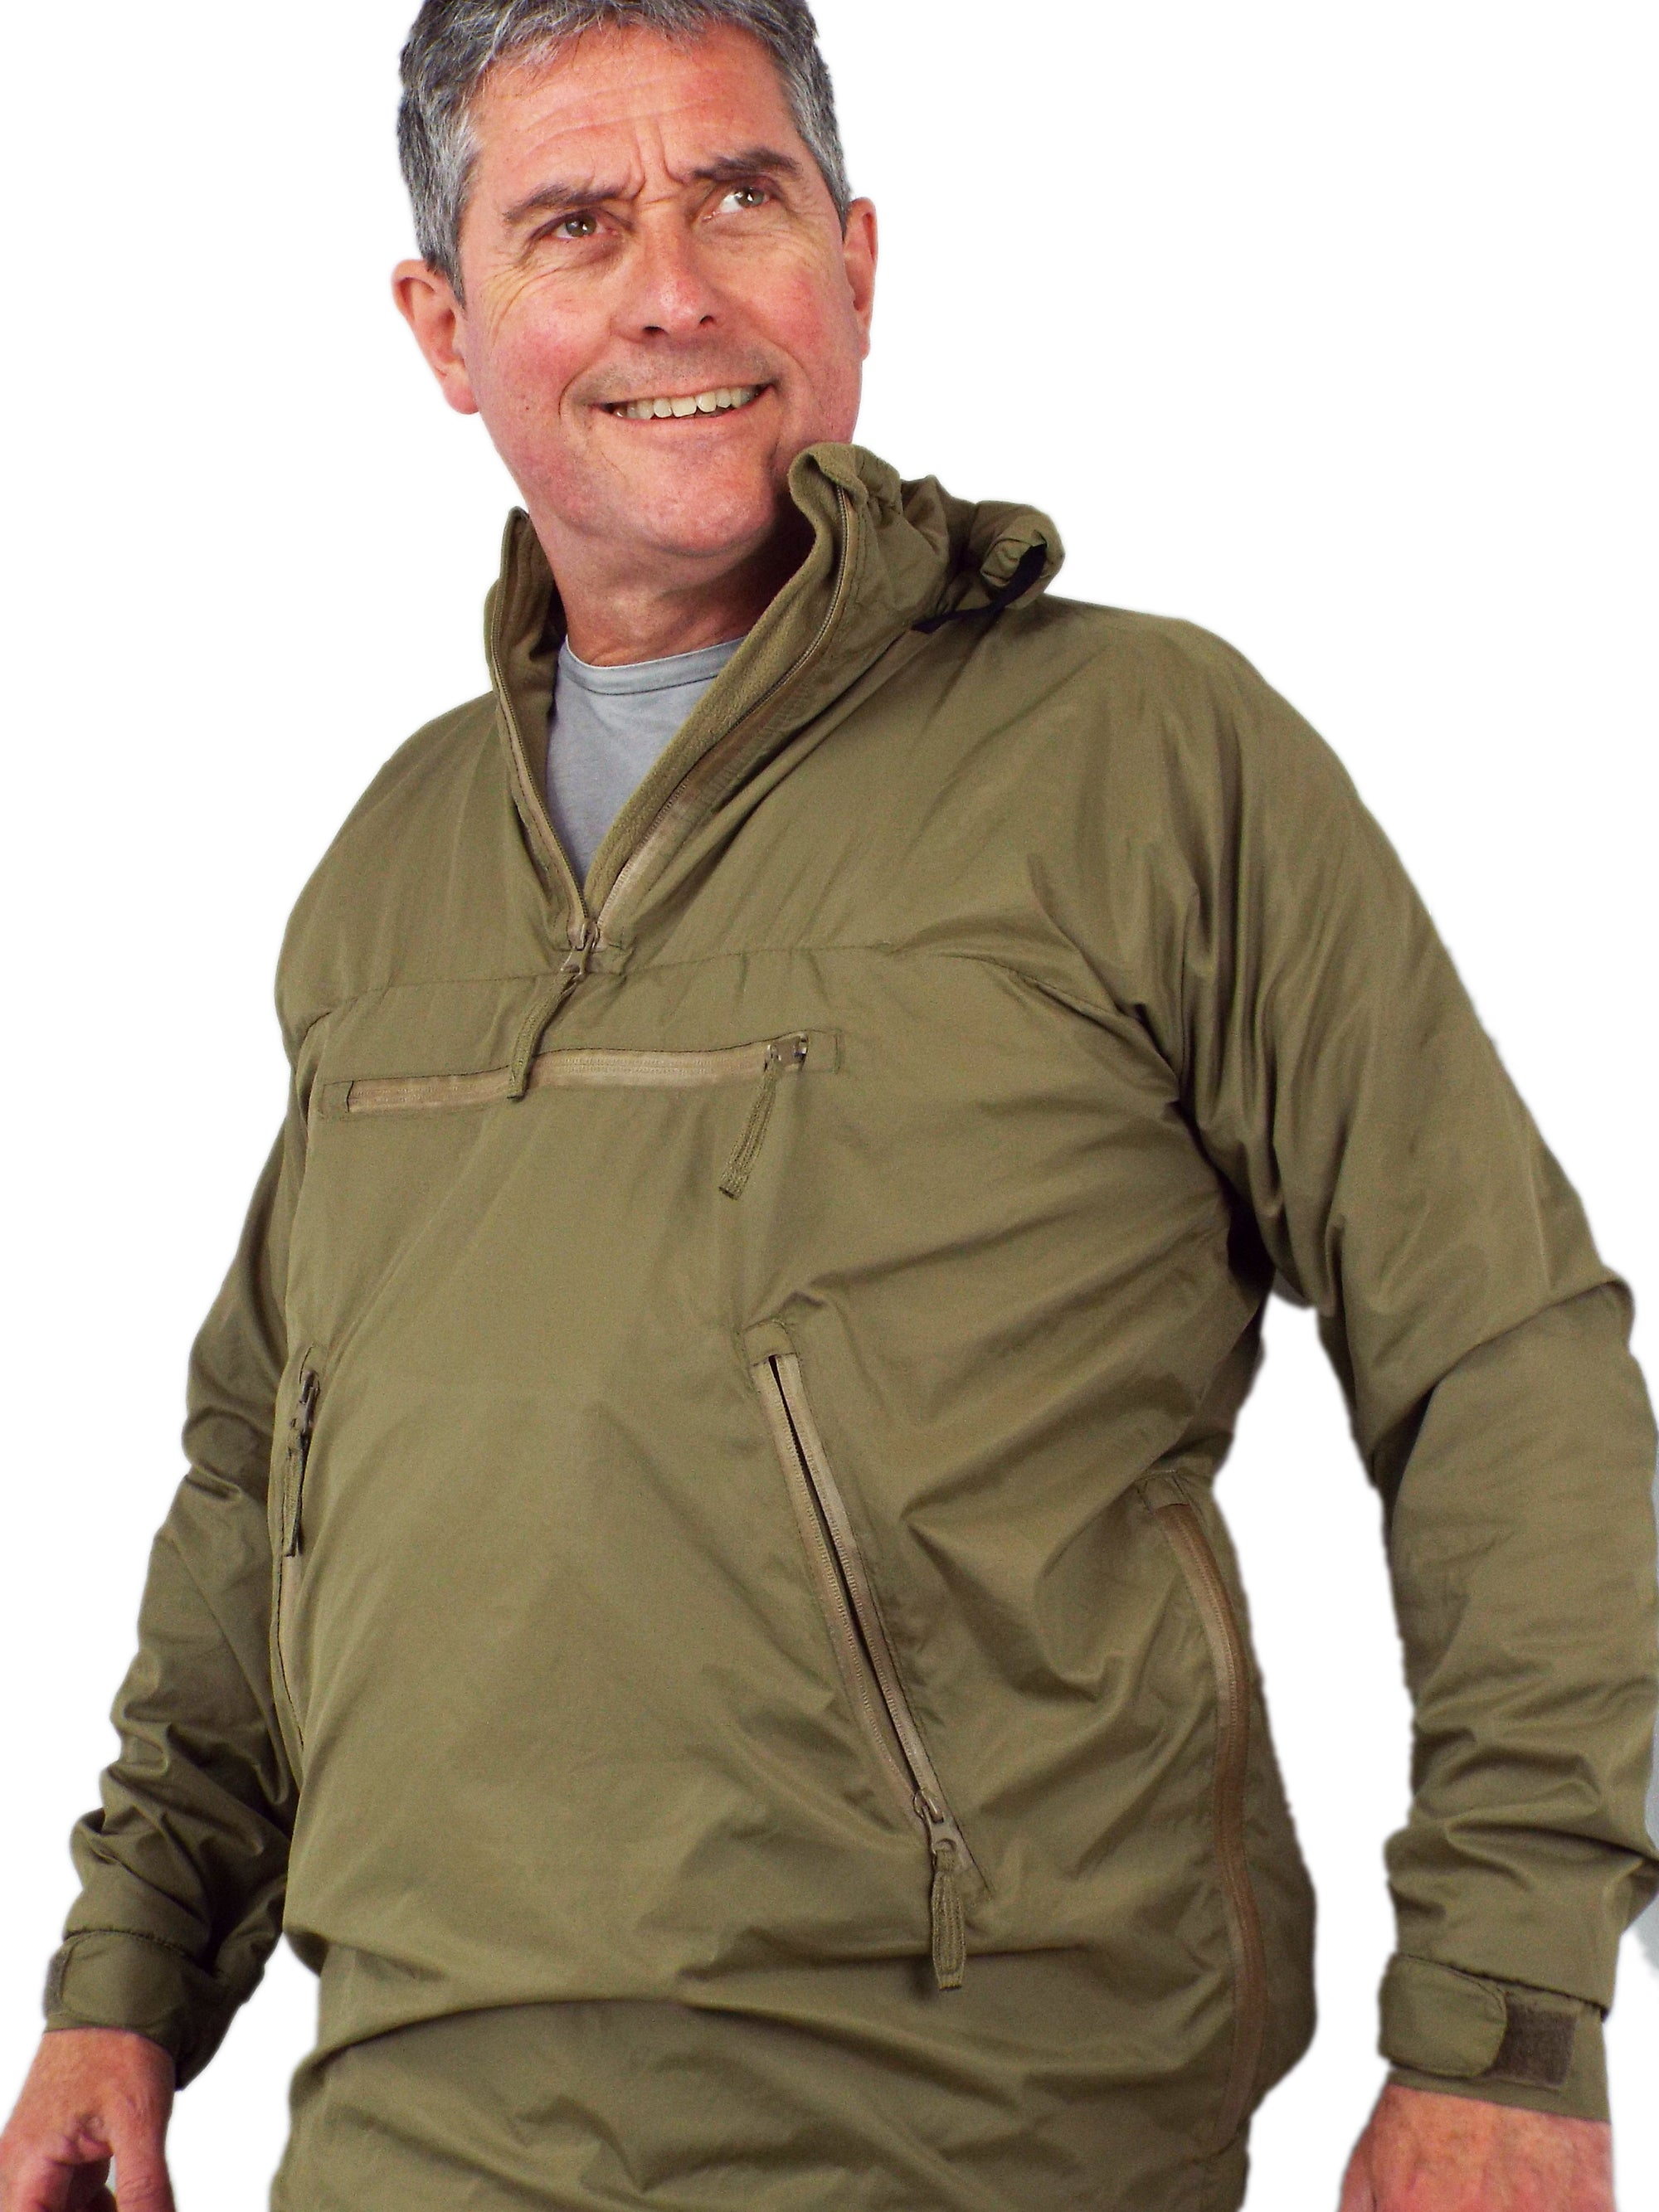 British Lightweight Thermal Smock with hood - light olive green